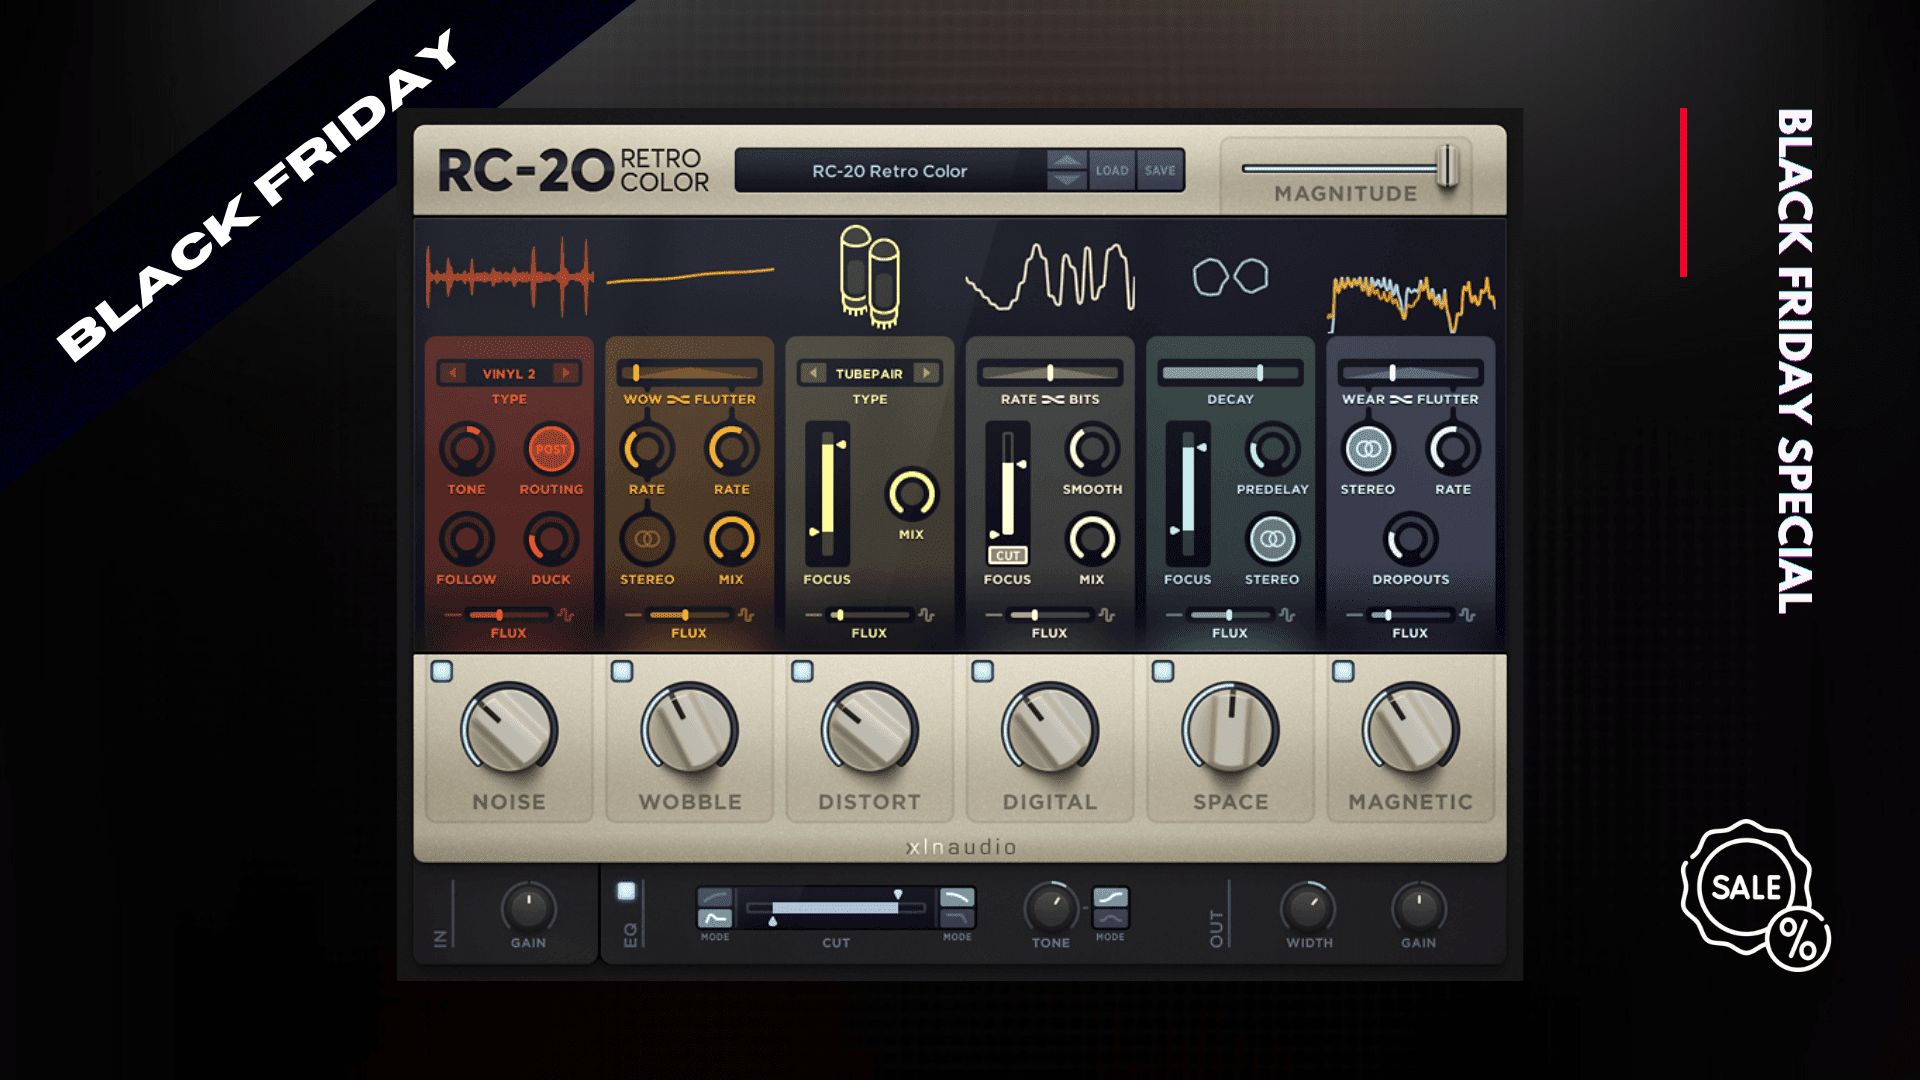 XLN AUDIO RC-20 is available at 50% off for a limited time